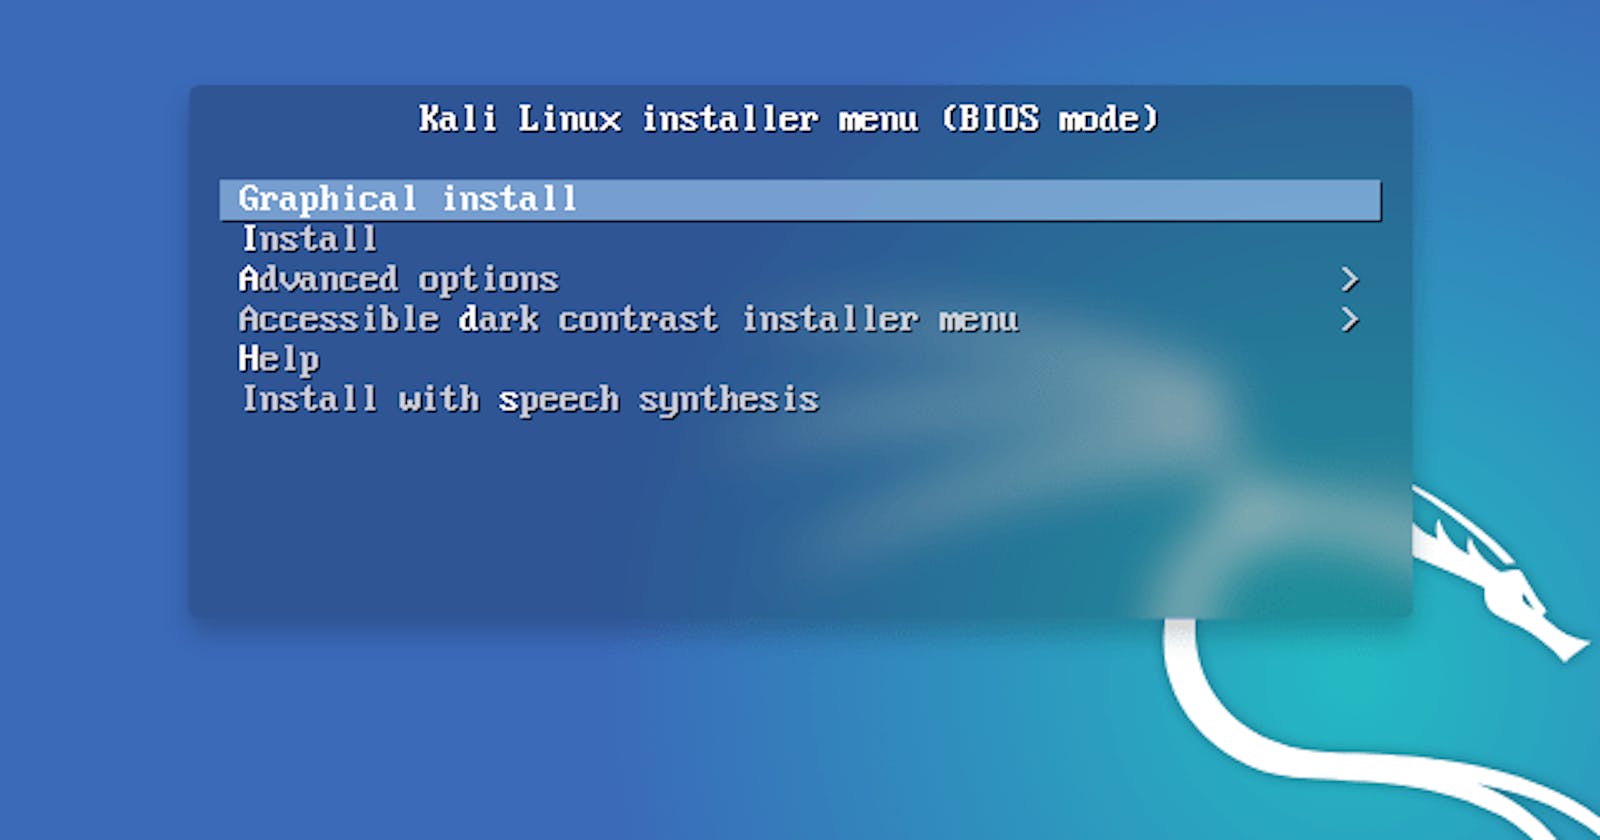 How to install kali linux?